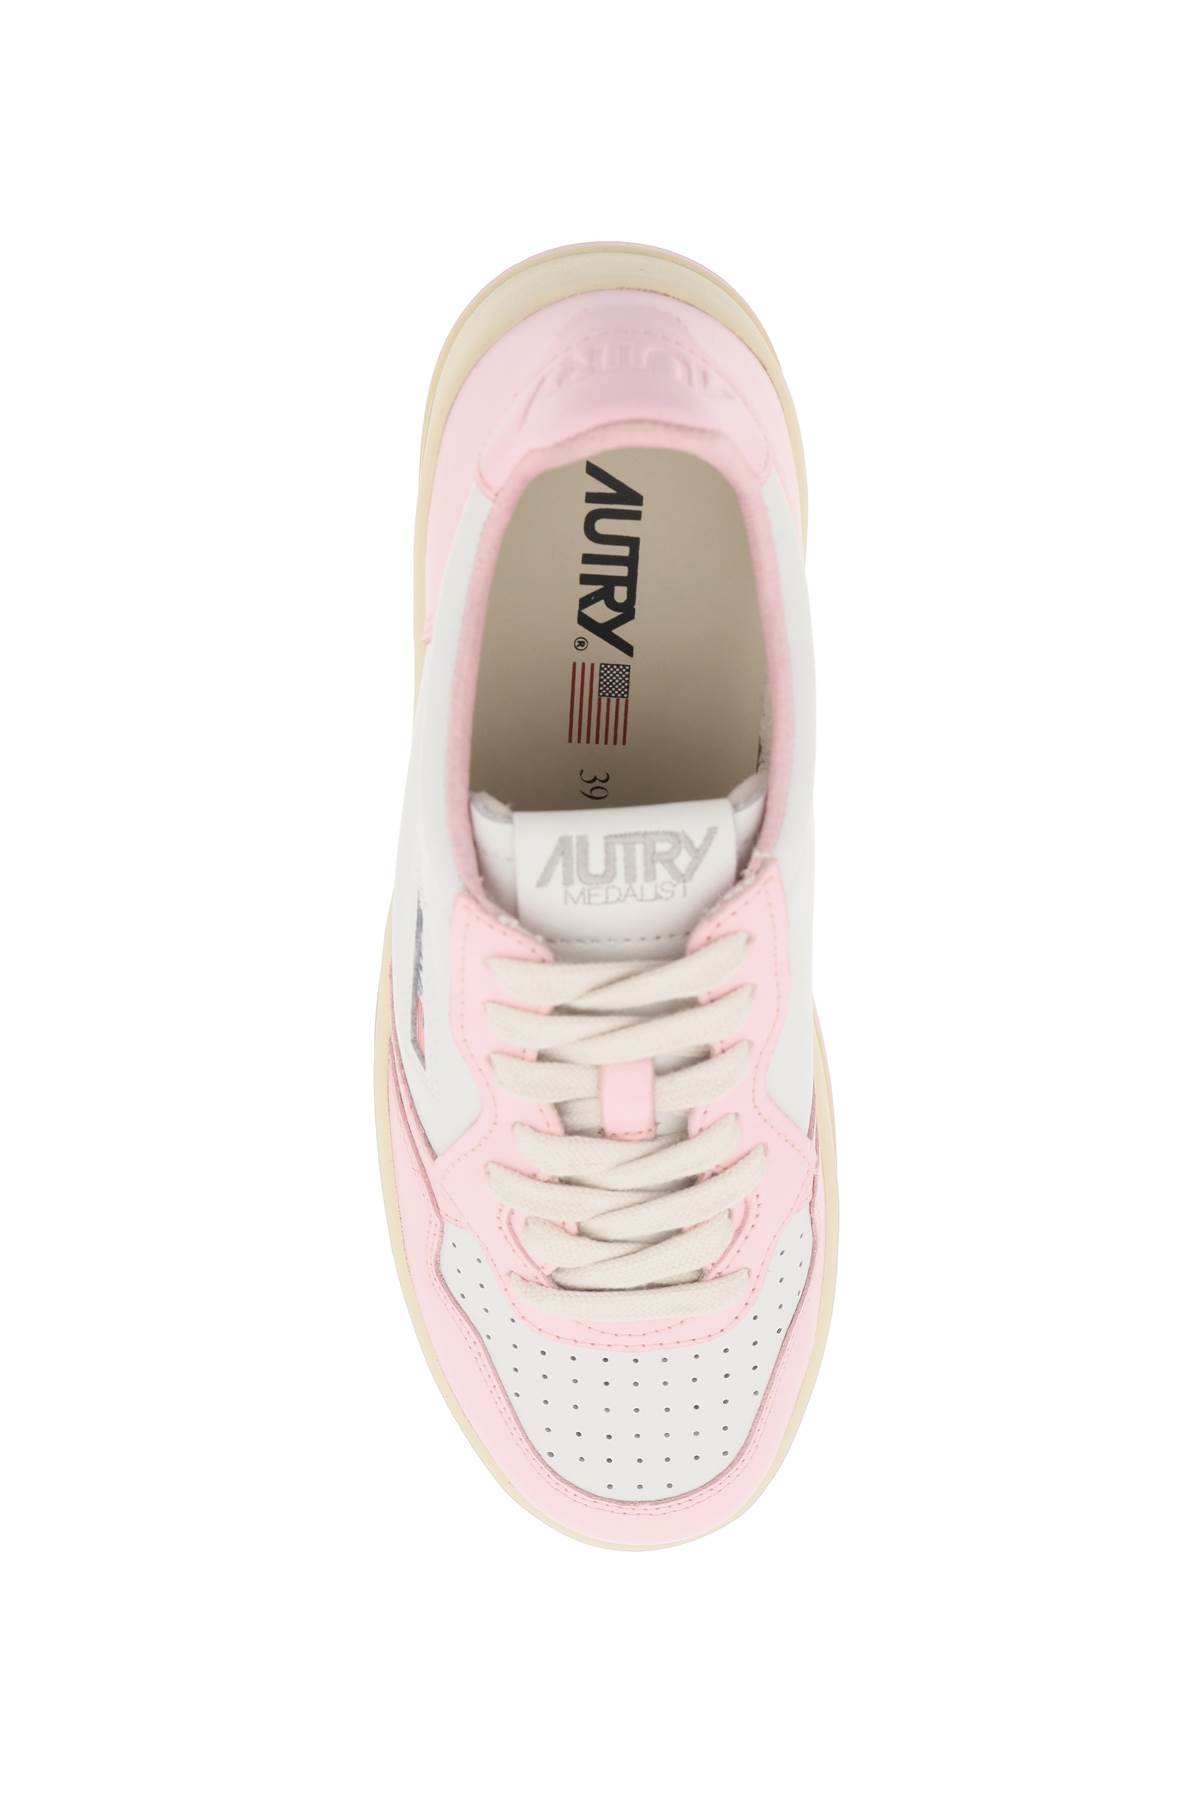 Shop Autry Medalist Low Sneakers In Blush Bride (white)